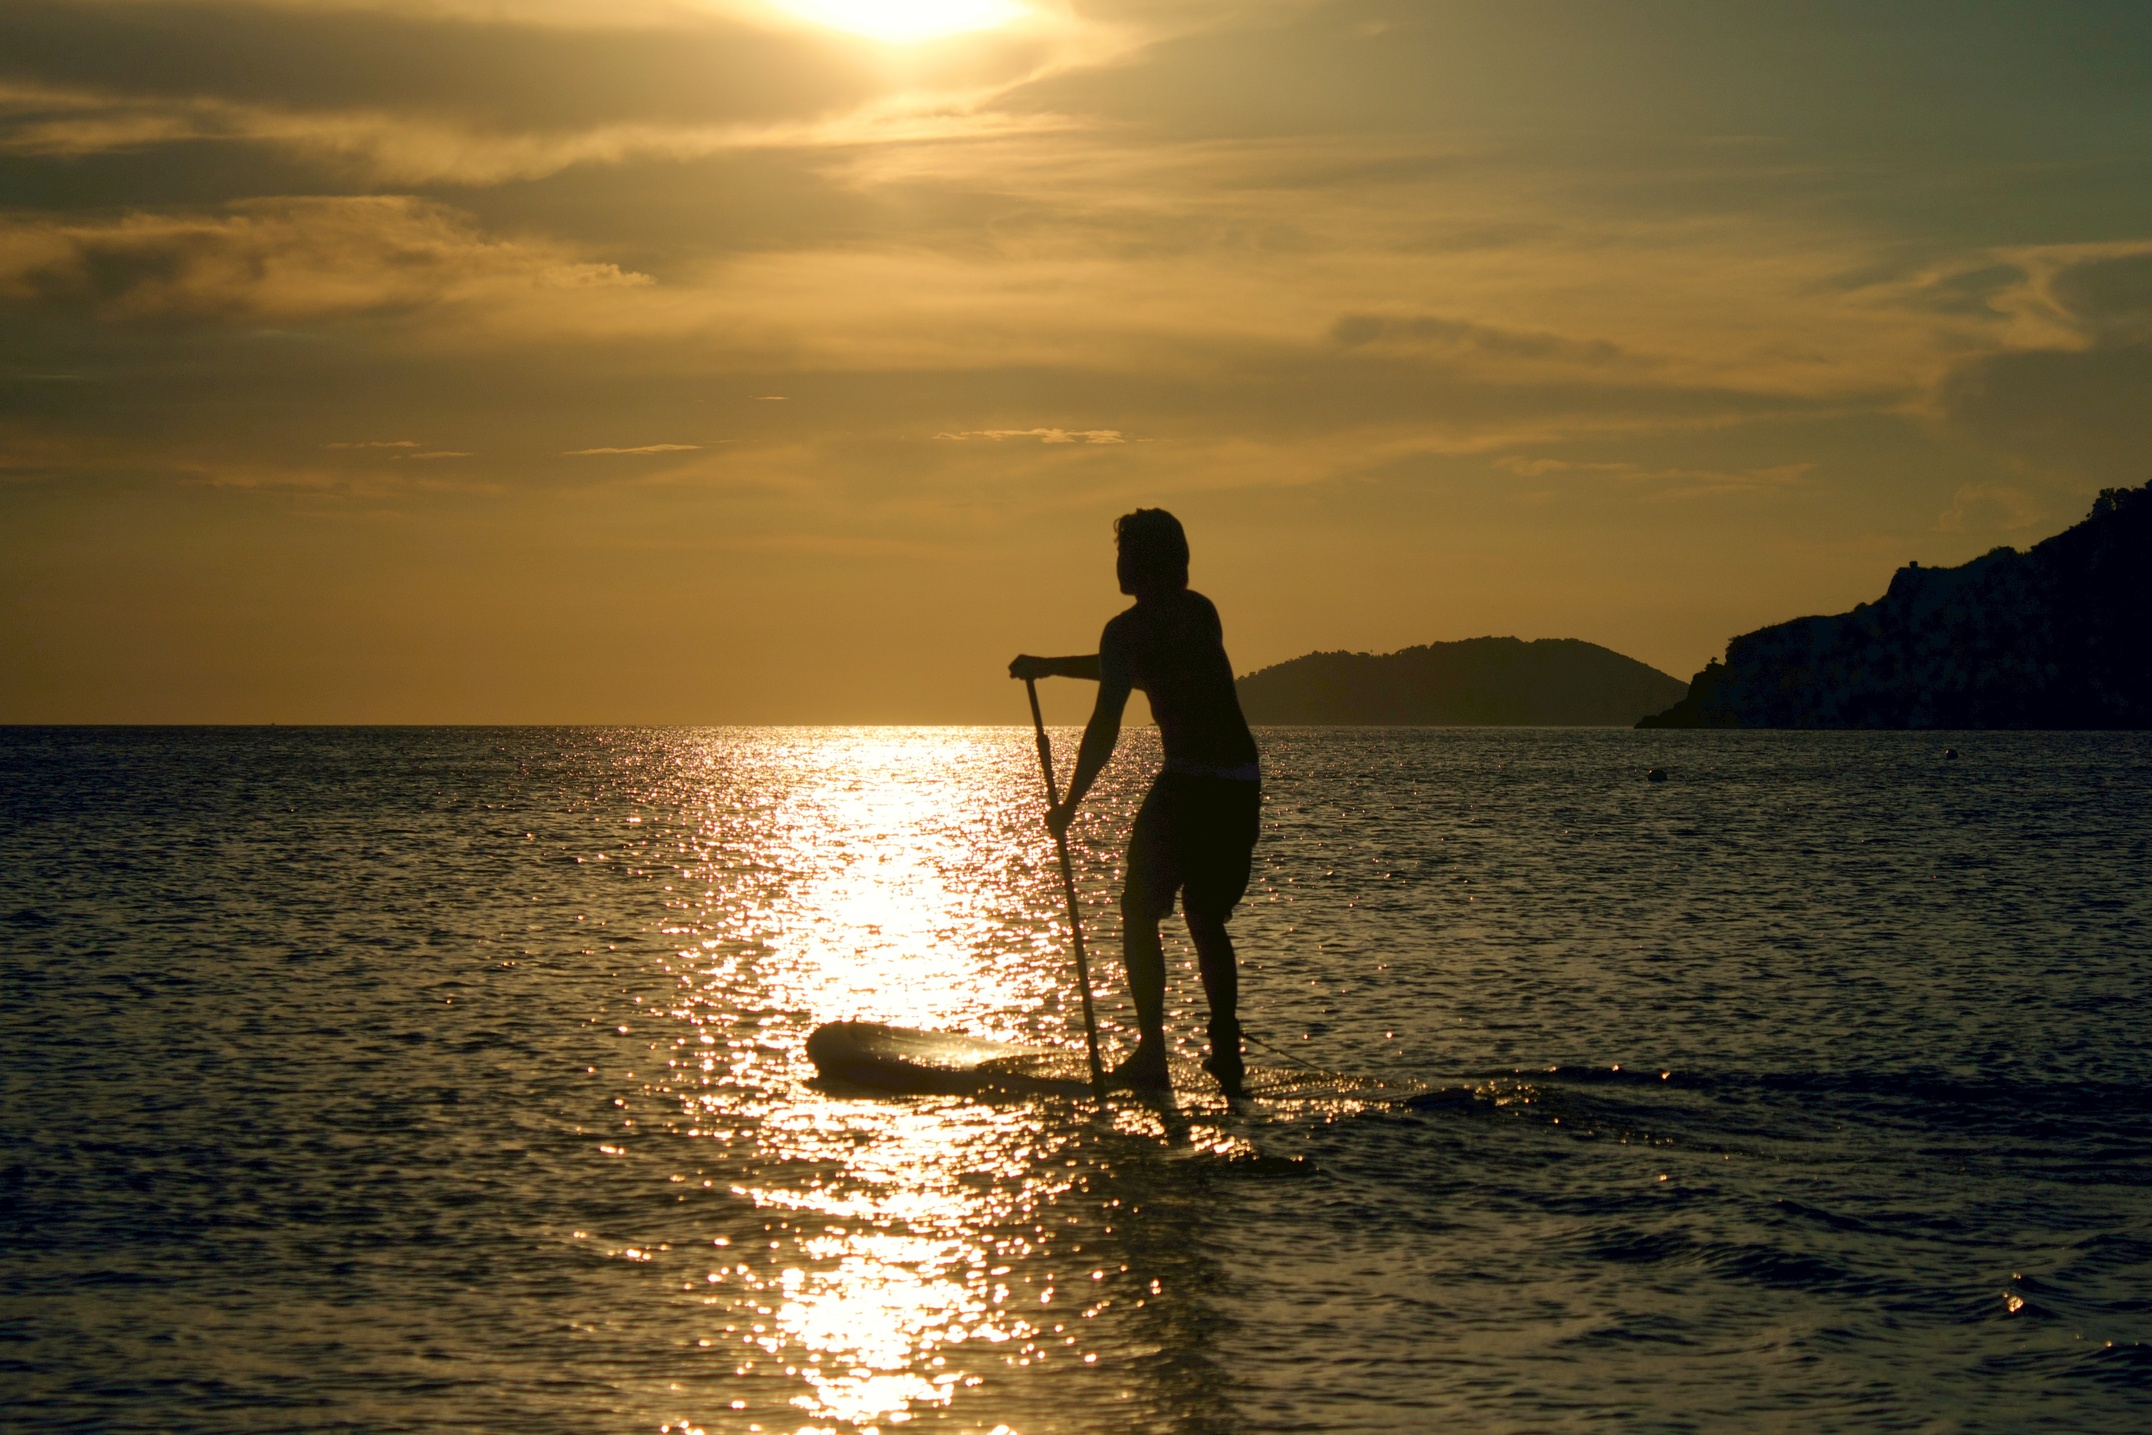 SUP stand up paddleboarder in the sun credit Eduardo Taulois on Unsplash